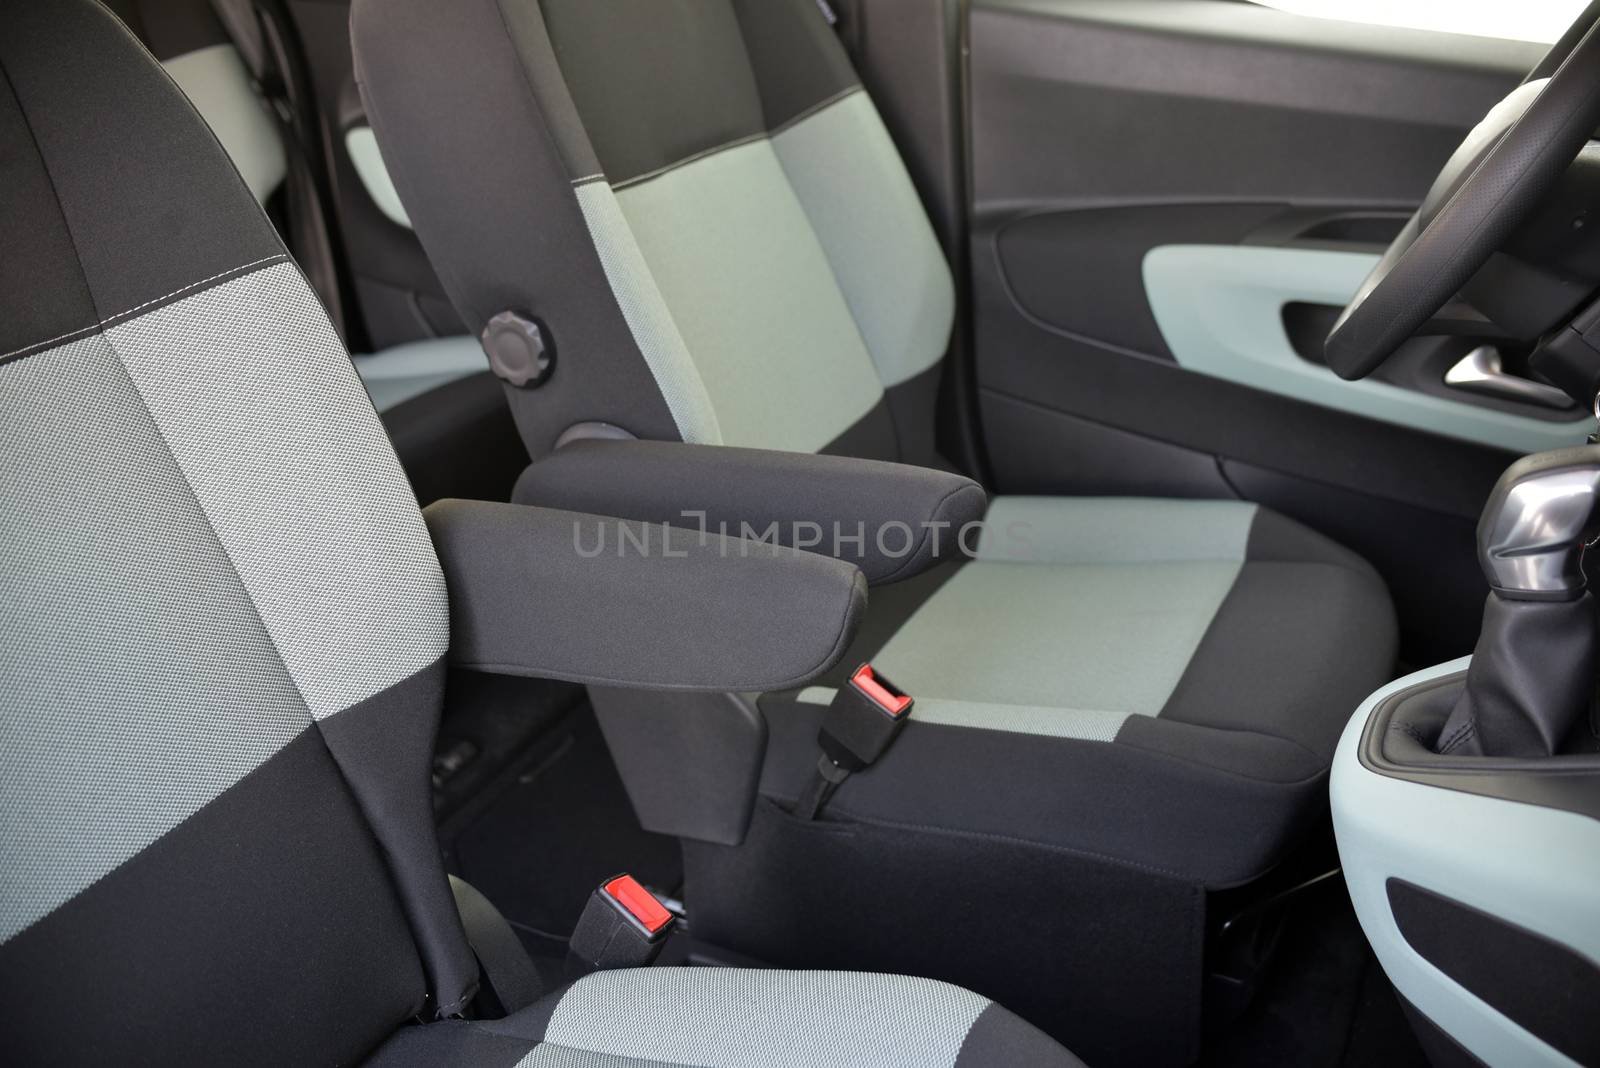 armrest in the luxury passenger car, front seats